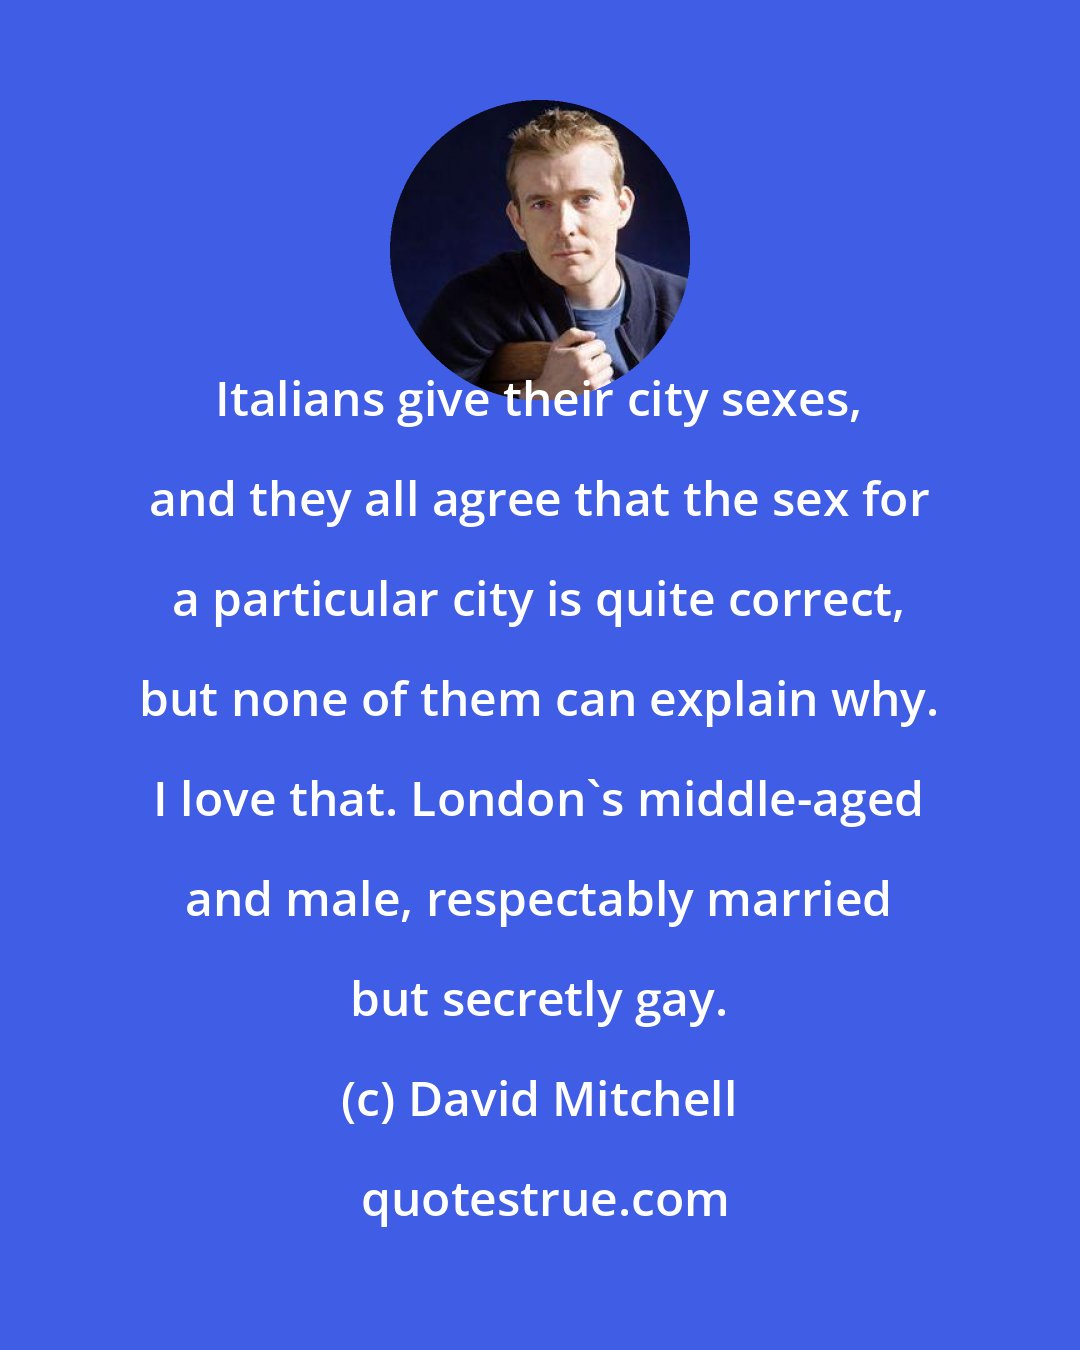 David Mitchell: Italians give their city sexes, and they all agree that the sex for a particular city is quite correct, but none of them can explain why. I love that. London's middle-aged and male, respectably married but secretly gay.